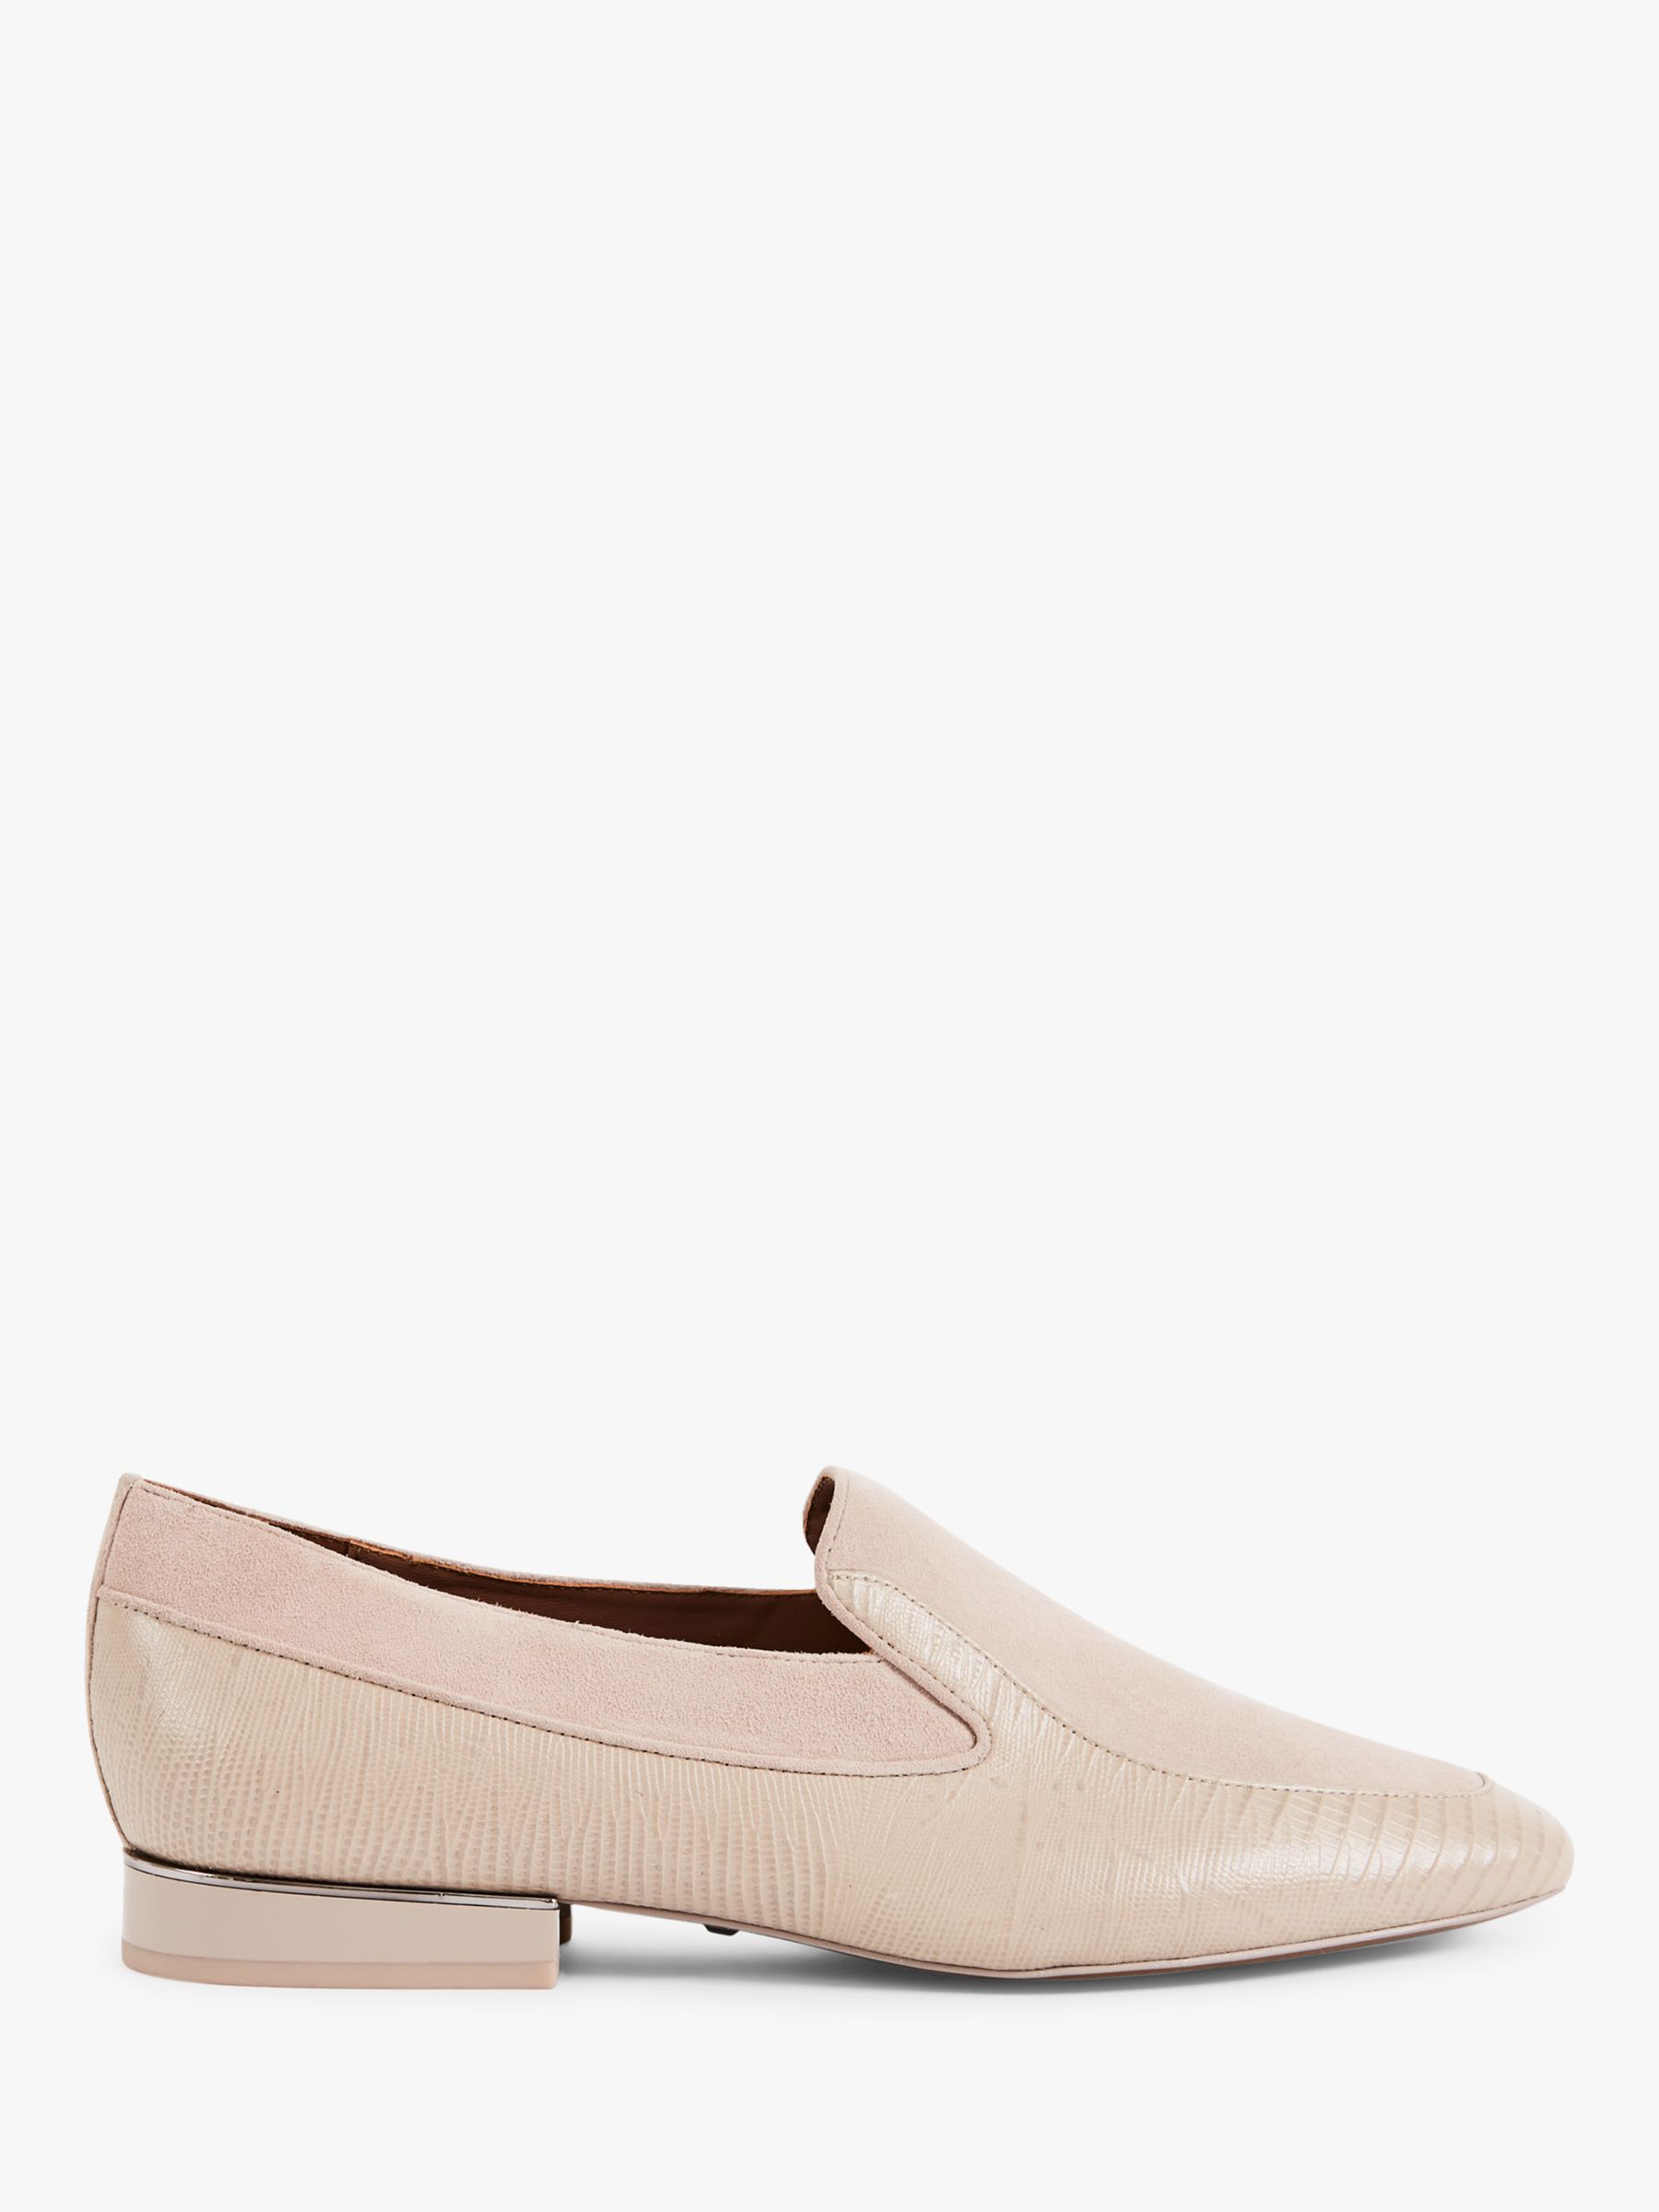 Reiss Nina Leather Slip On Loafers